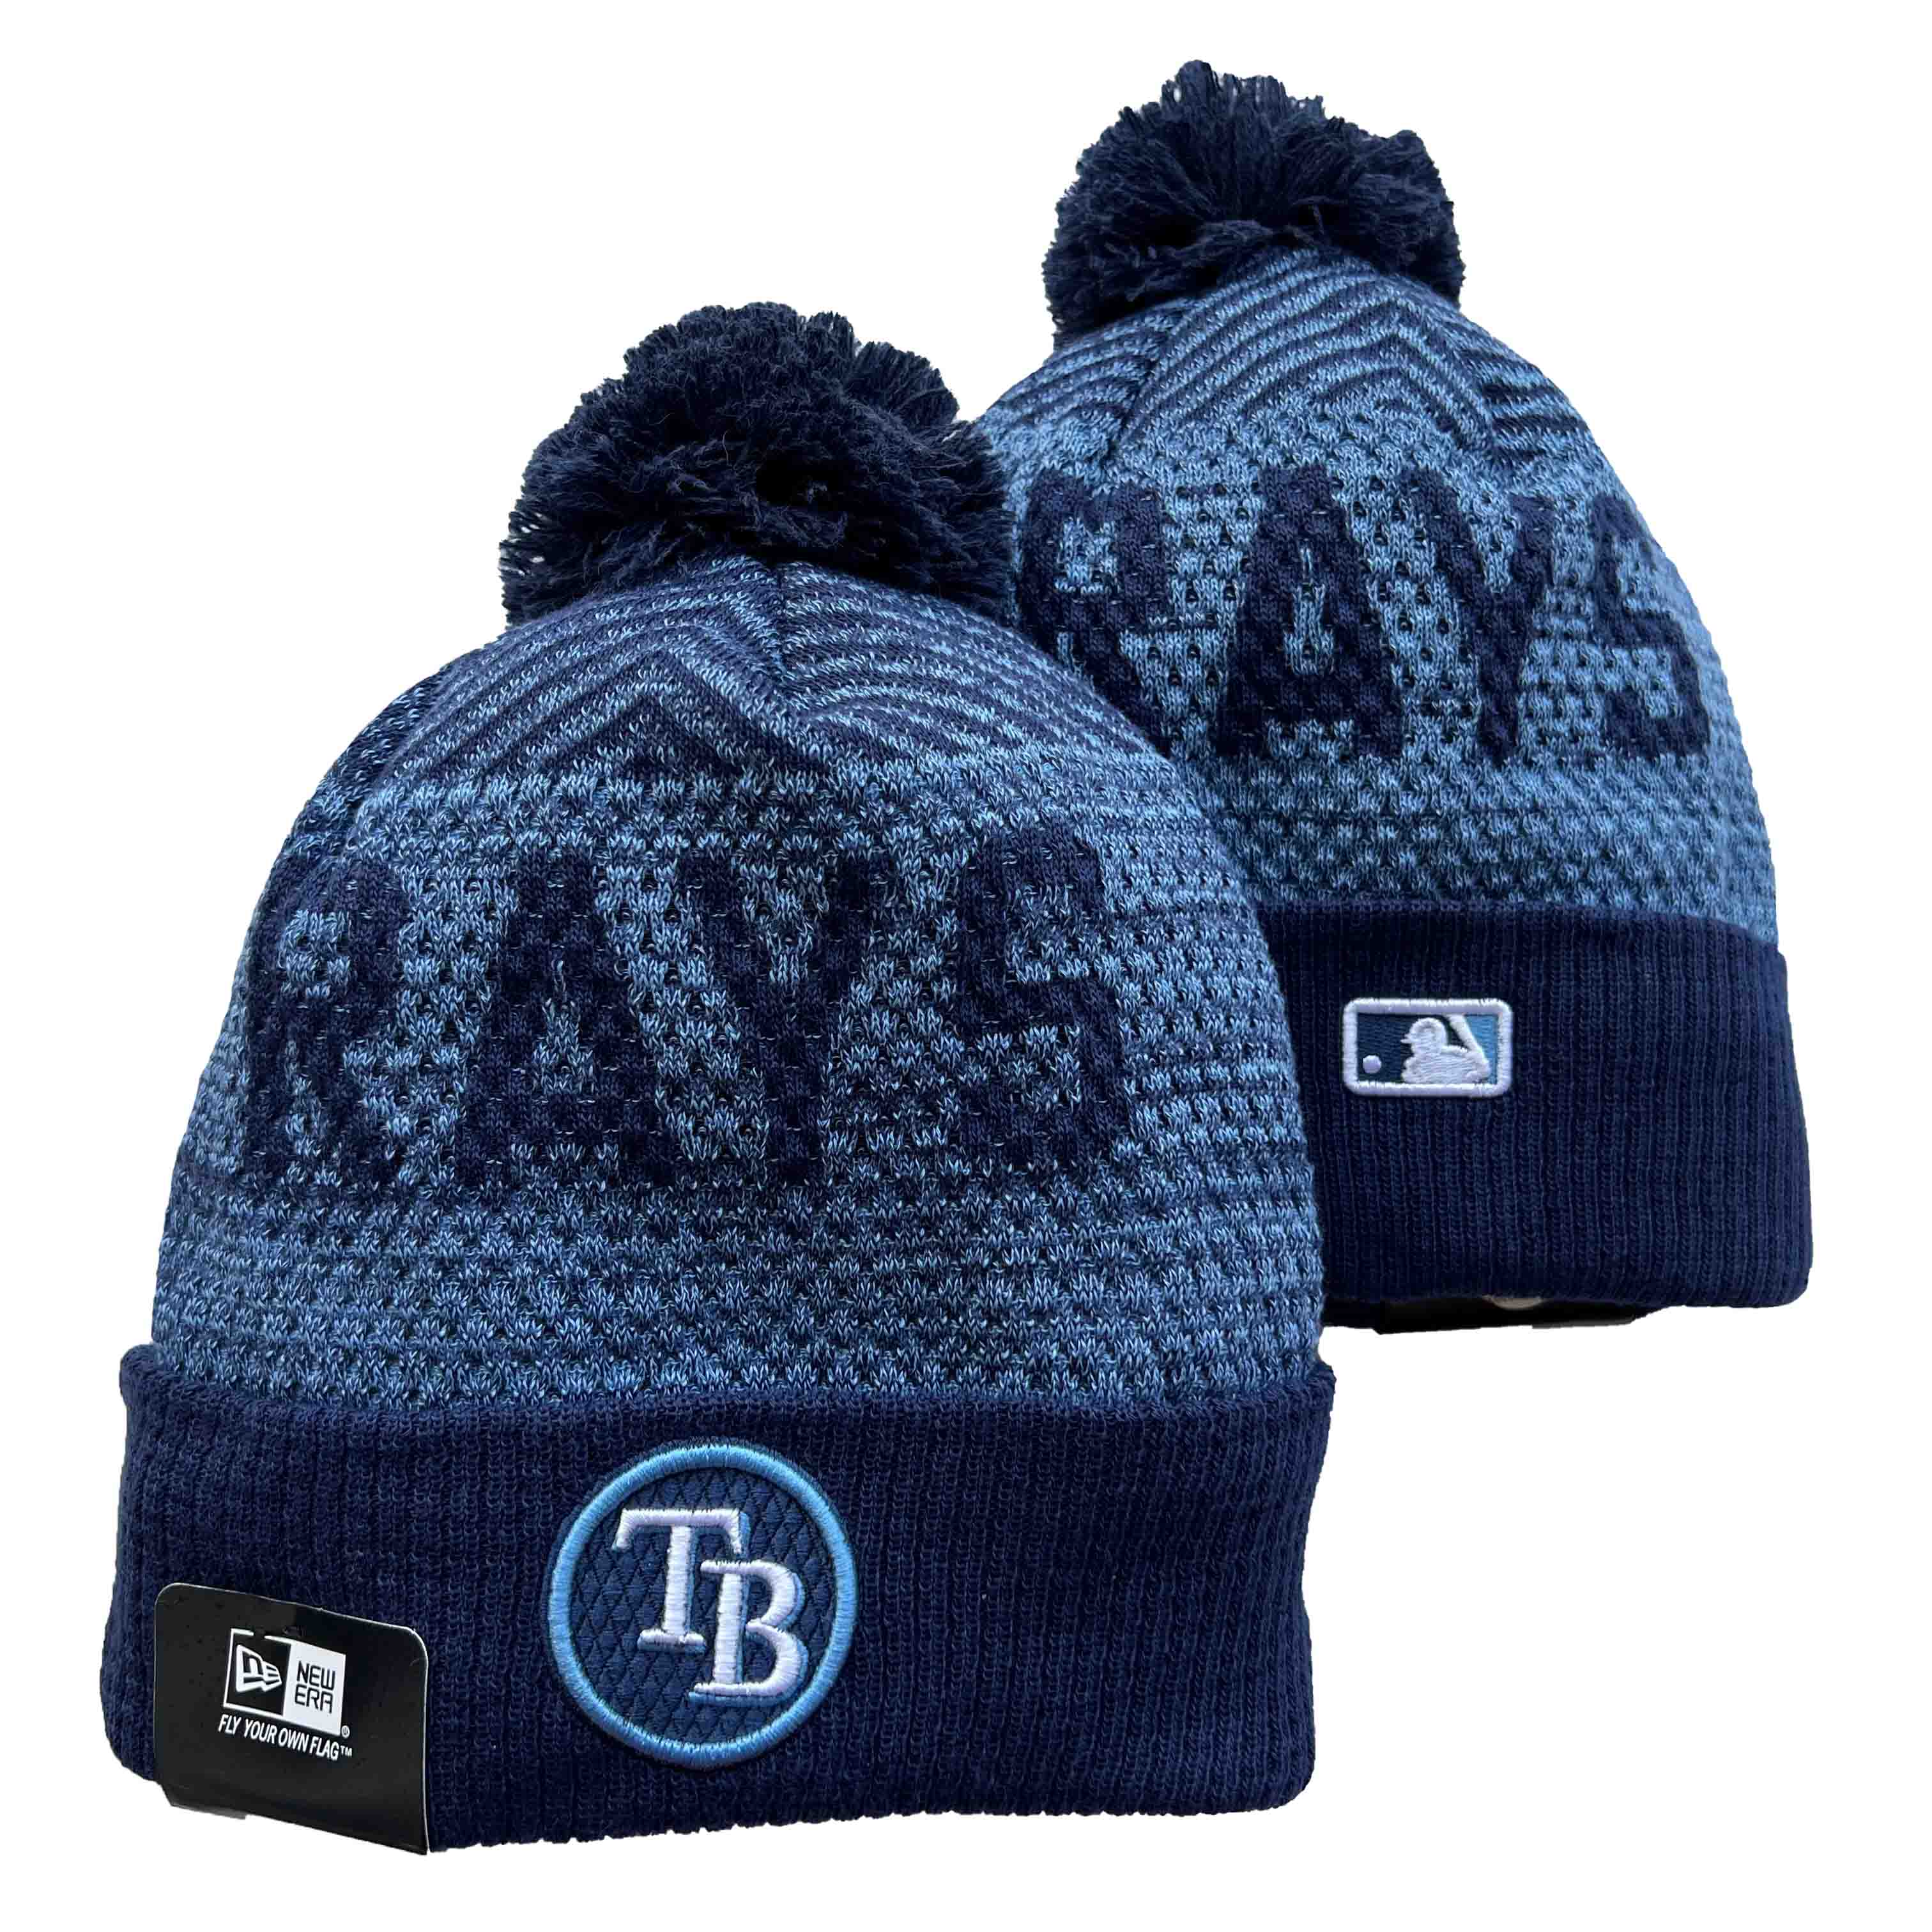 Tampa Bay Rays Knit Hats -1